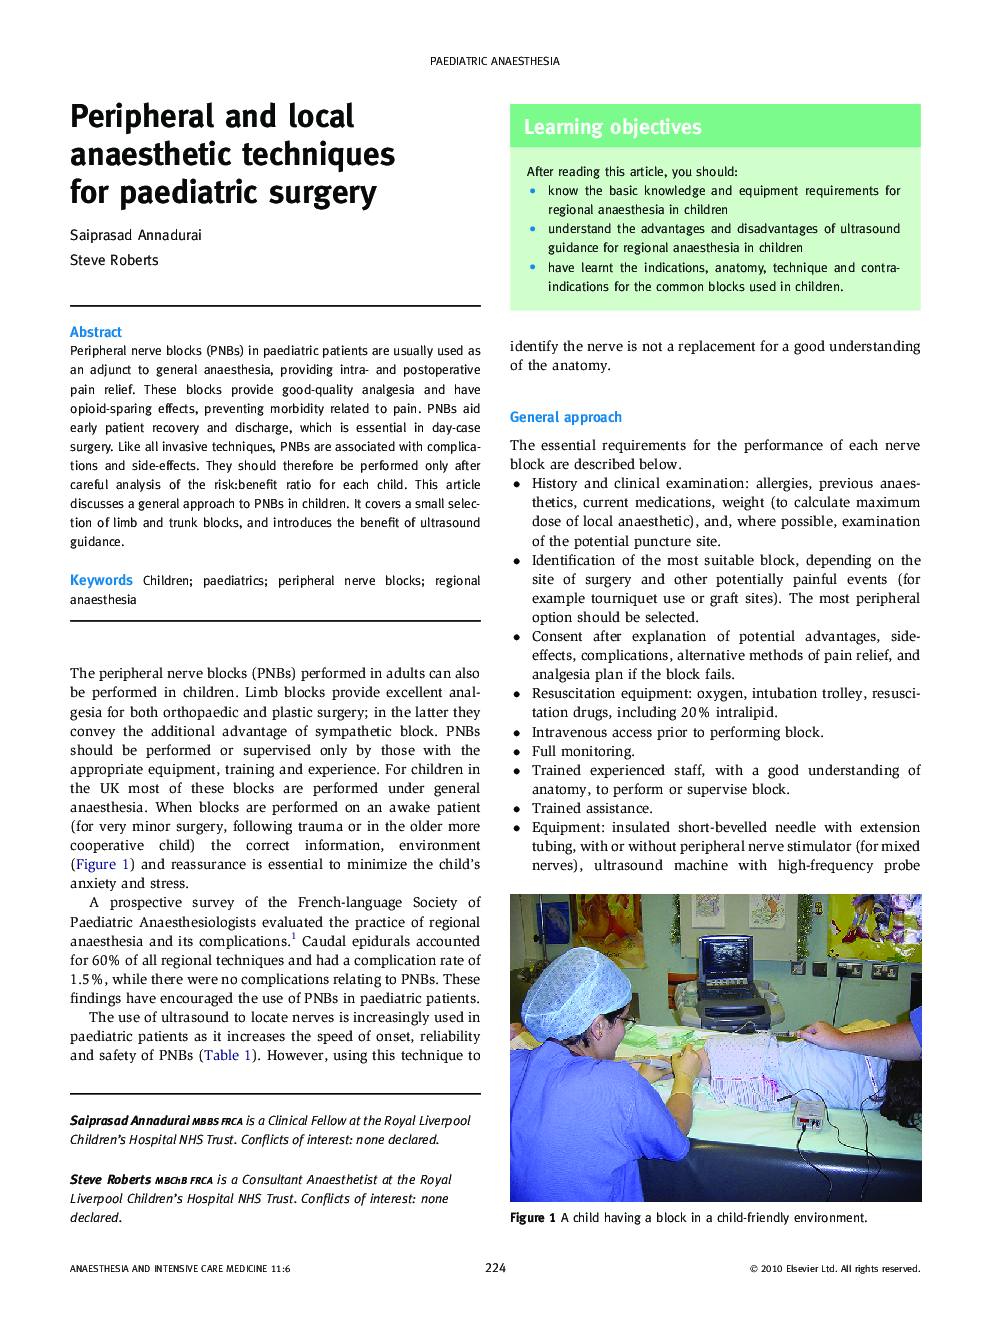 Peripheral and local anaesthetic techniques for paediatric surgery